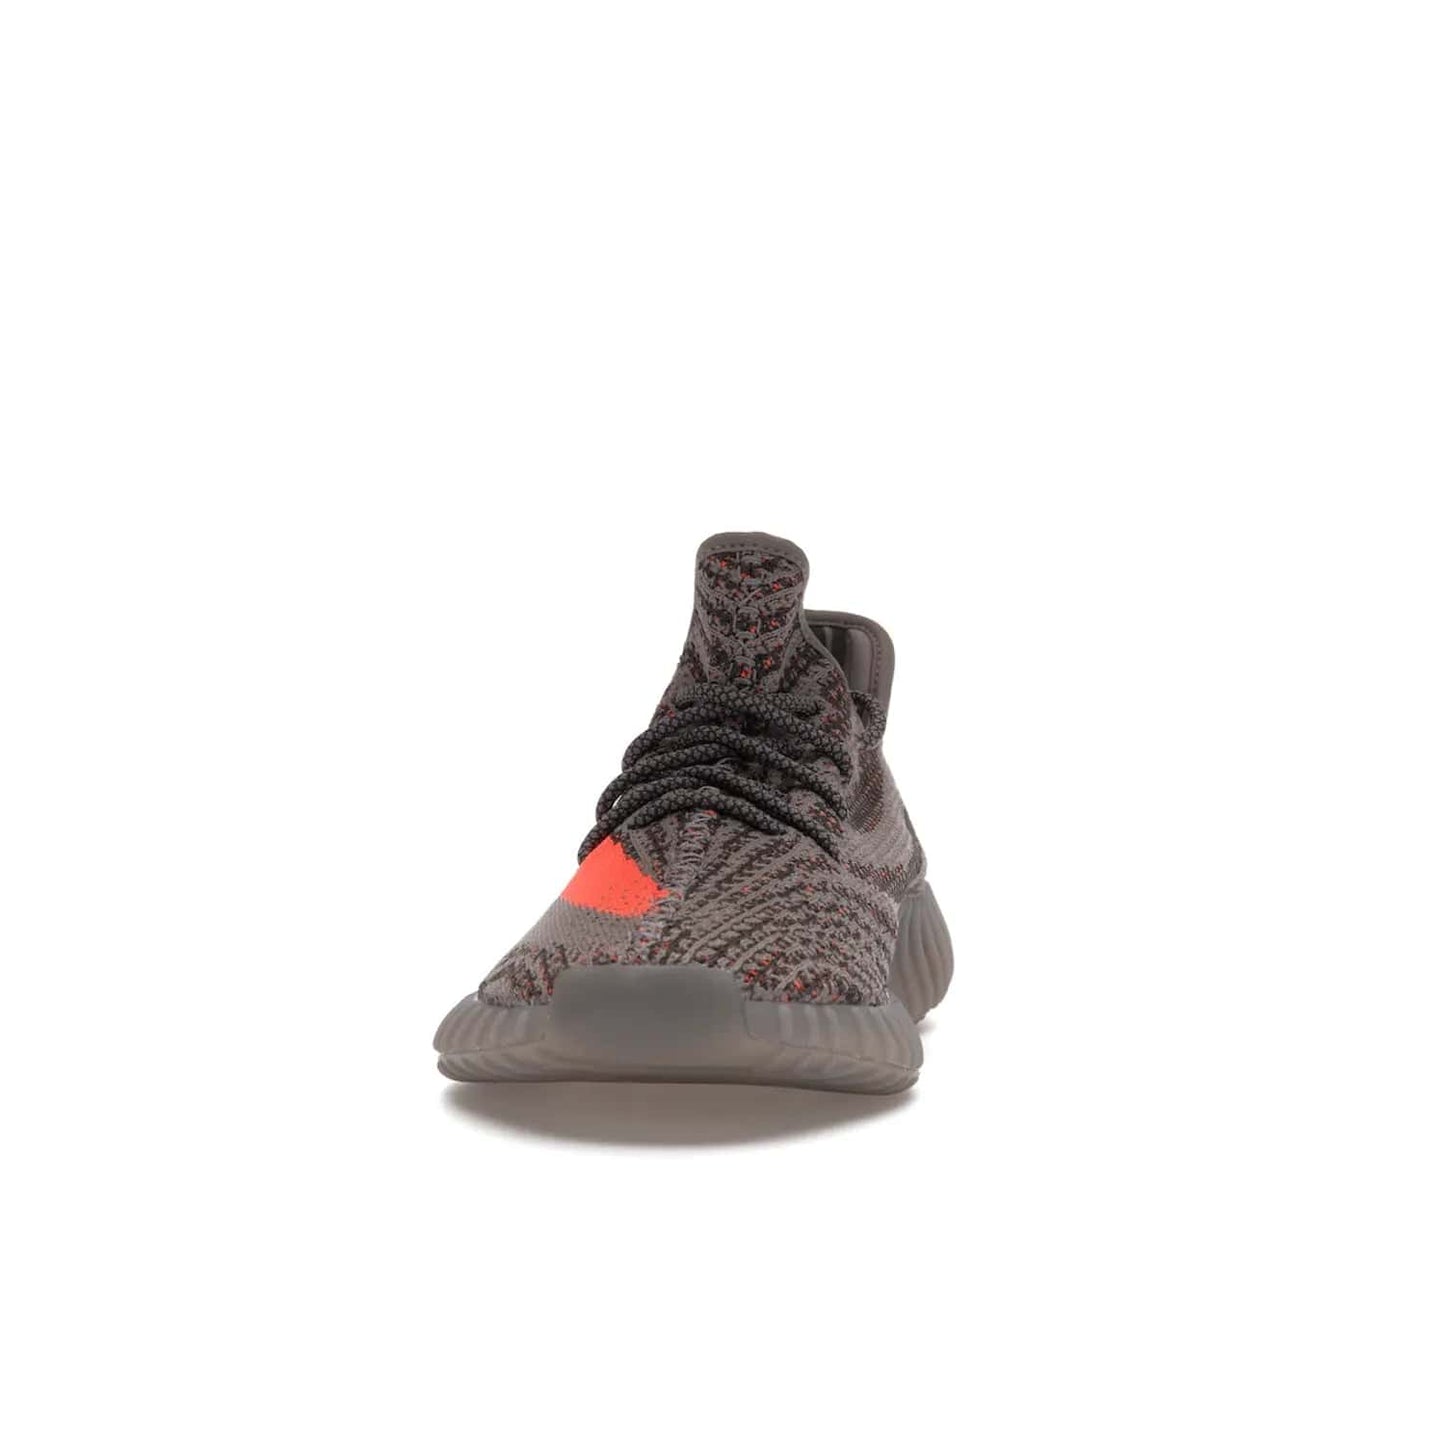 adidas Yeezy Boost 350 V2 Beluga Reflective - Image 11 - Only at www.BallersClubKickz.com - Shop the adidas Yeezy Boost 350 V2 Beluga Reflective: a stylish, reflective sneaker that stands out. Featuring Boost sole, Primeknit upper & signature orange stripe. Available Dec 2021.